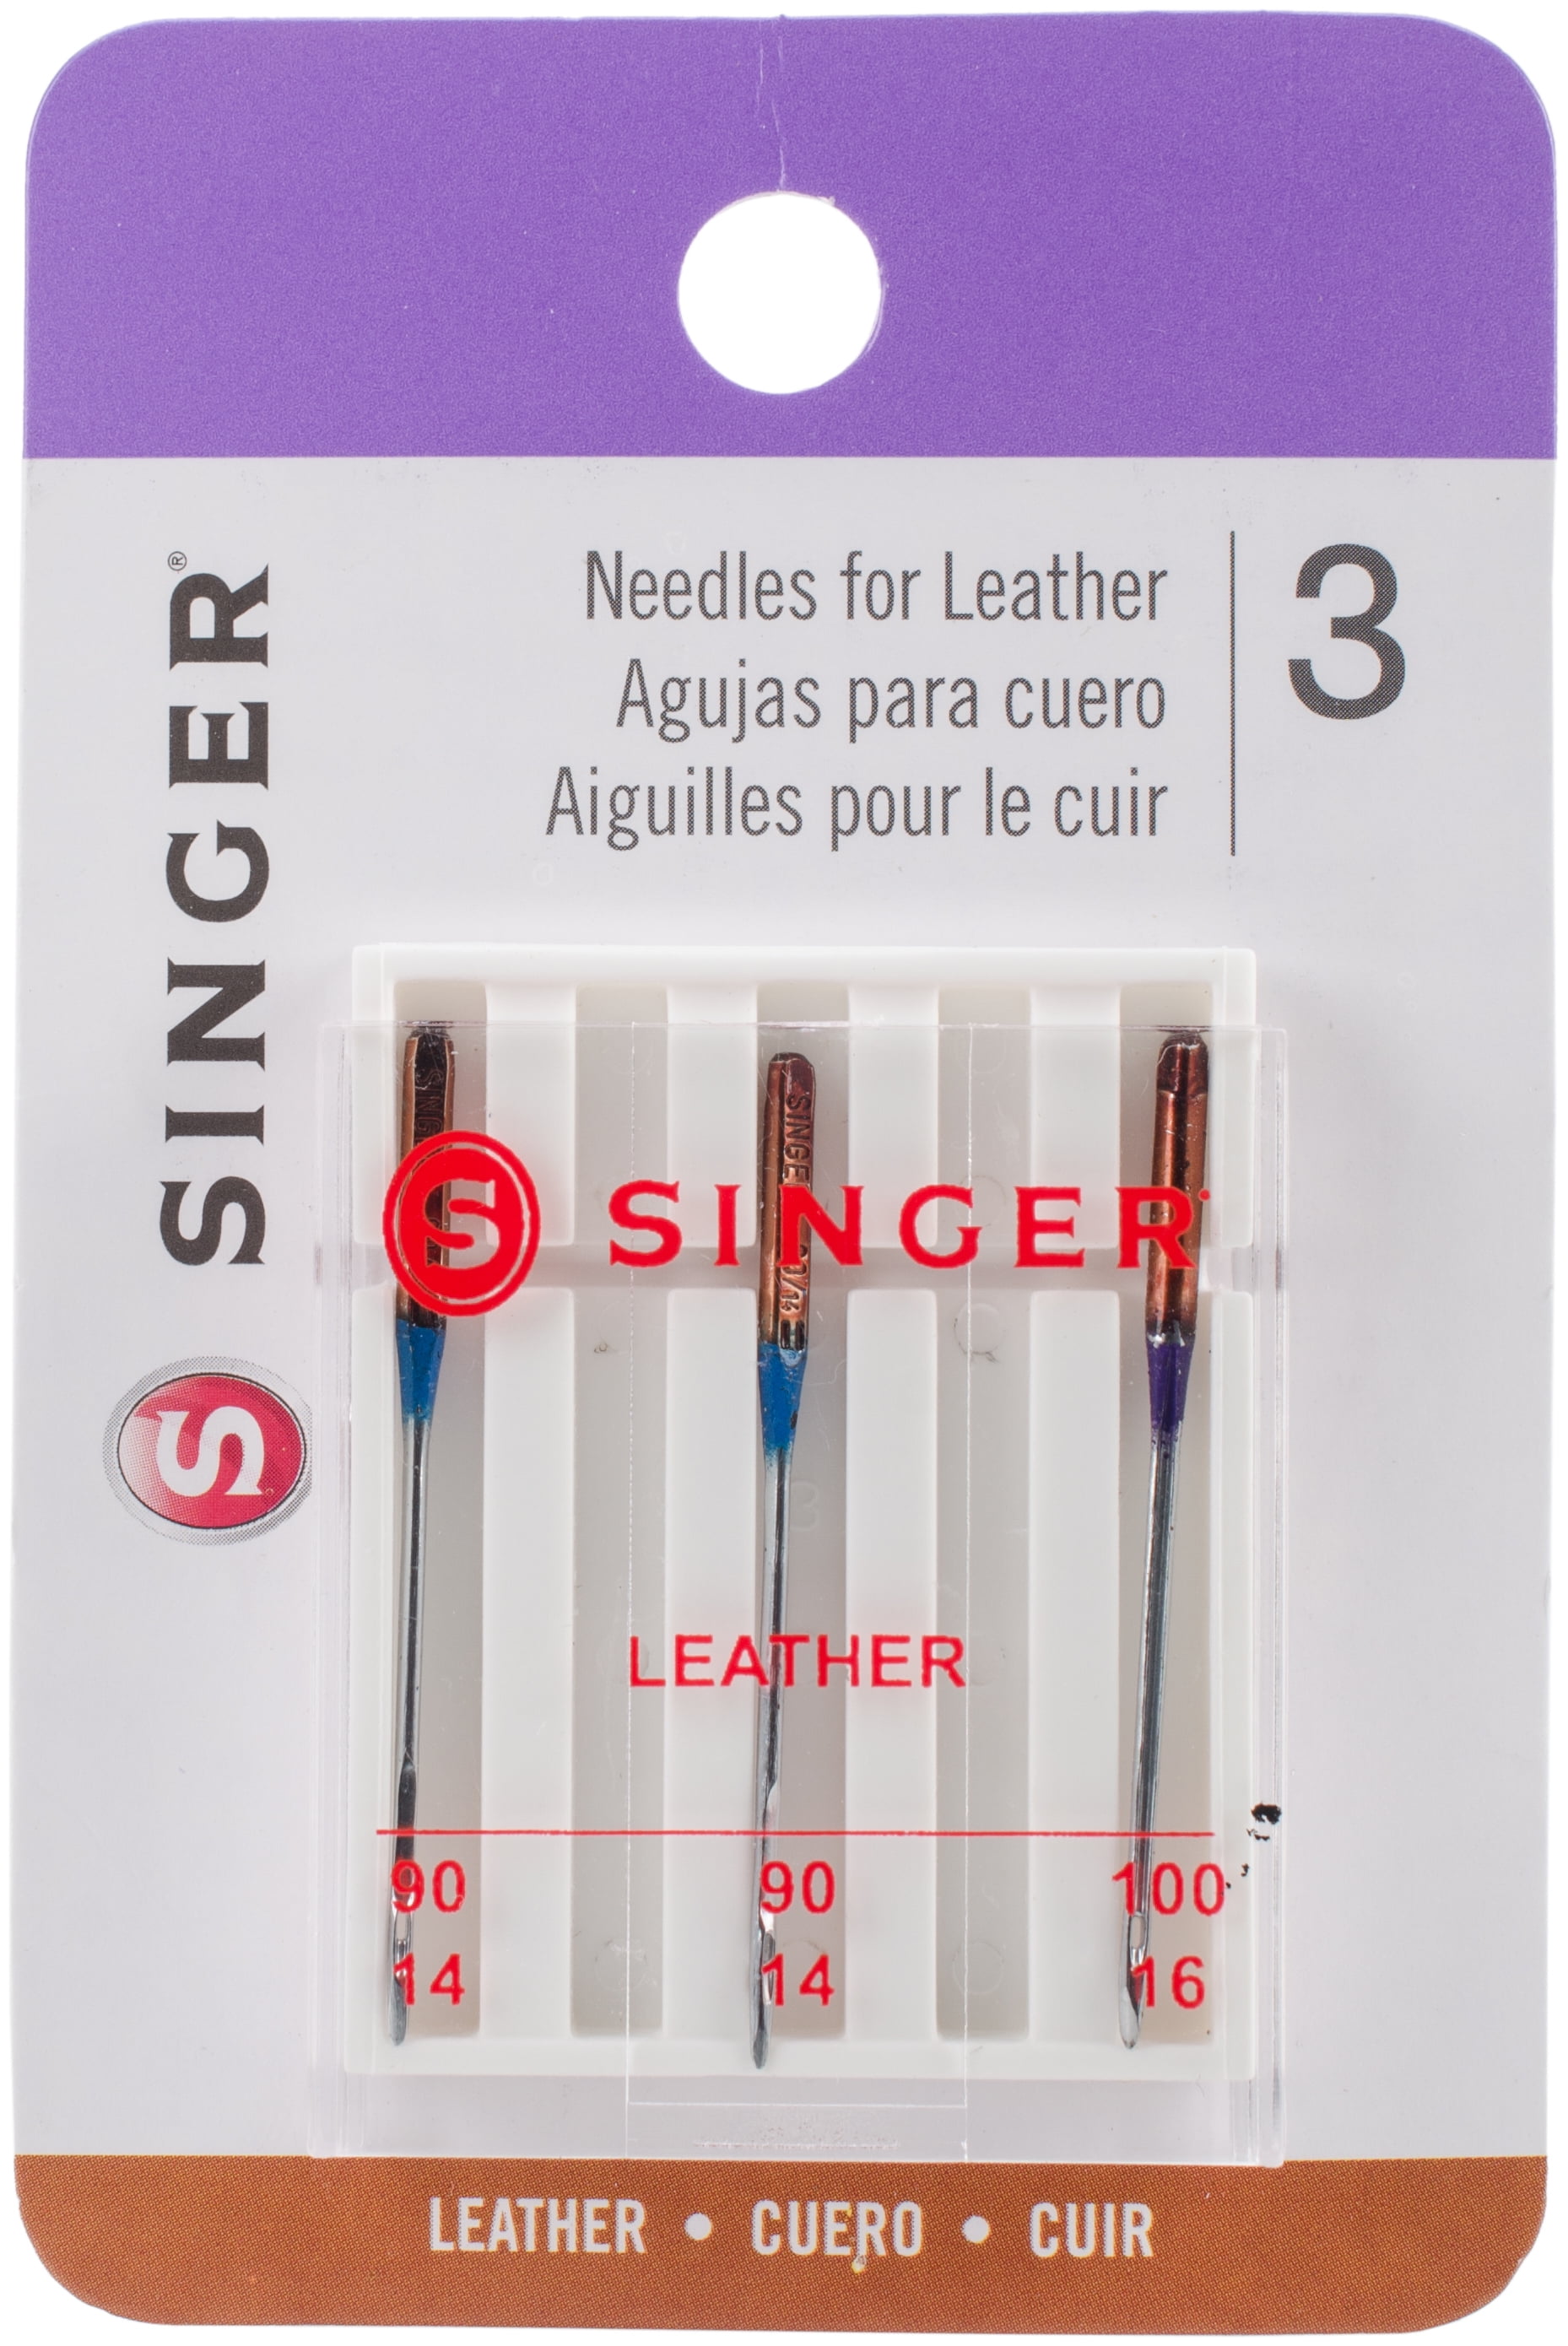 Singer Size 18 Top Stitch Sewing Machine Needles (5 Pack)